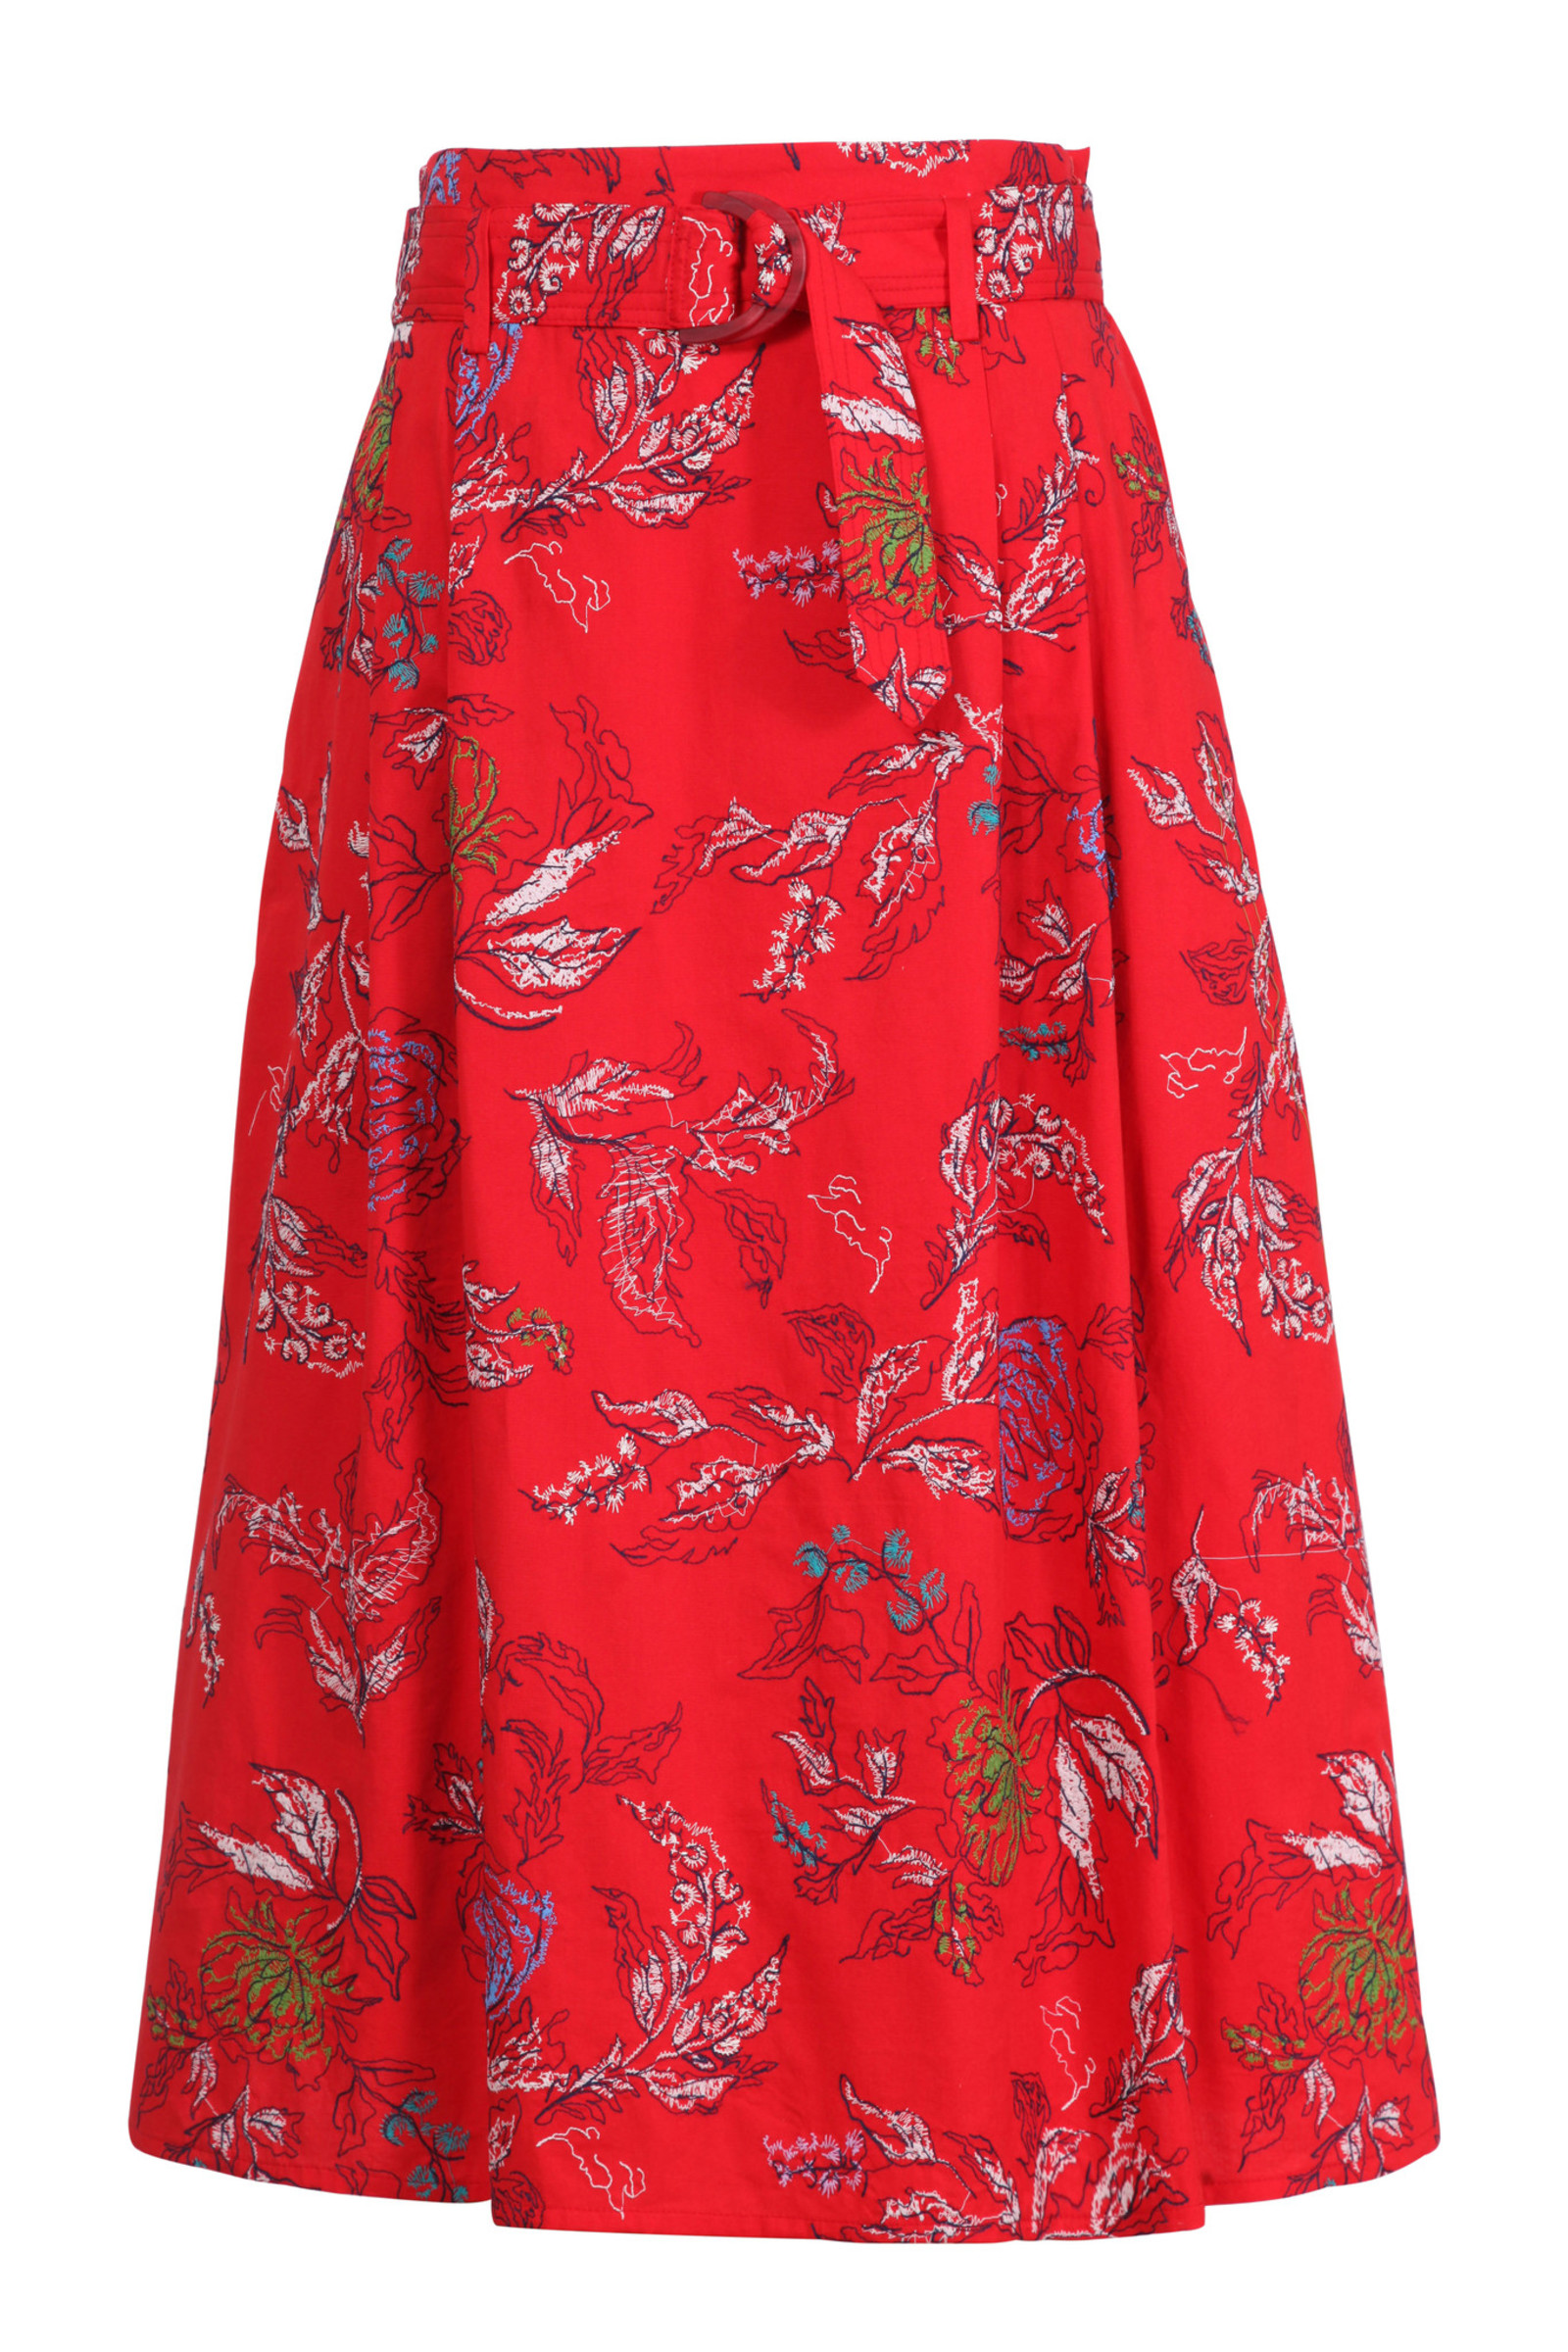 IVKO  Woman IVKO - Embroidered Skirt Floral Motif Red